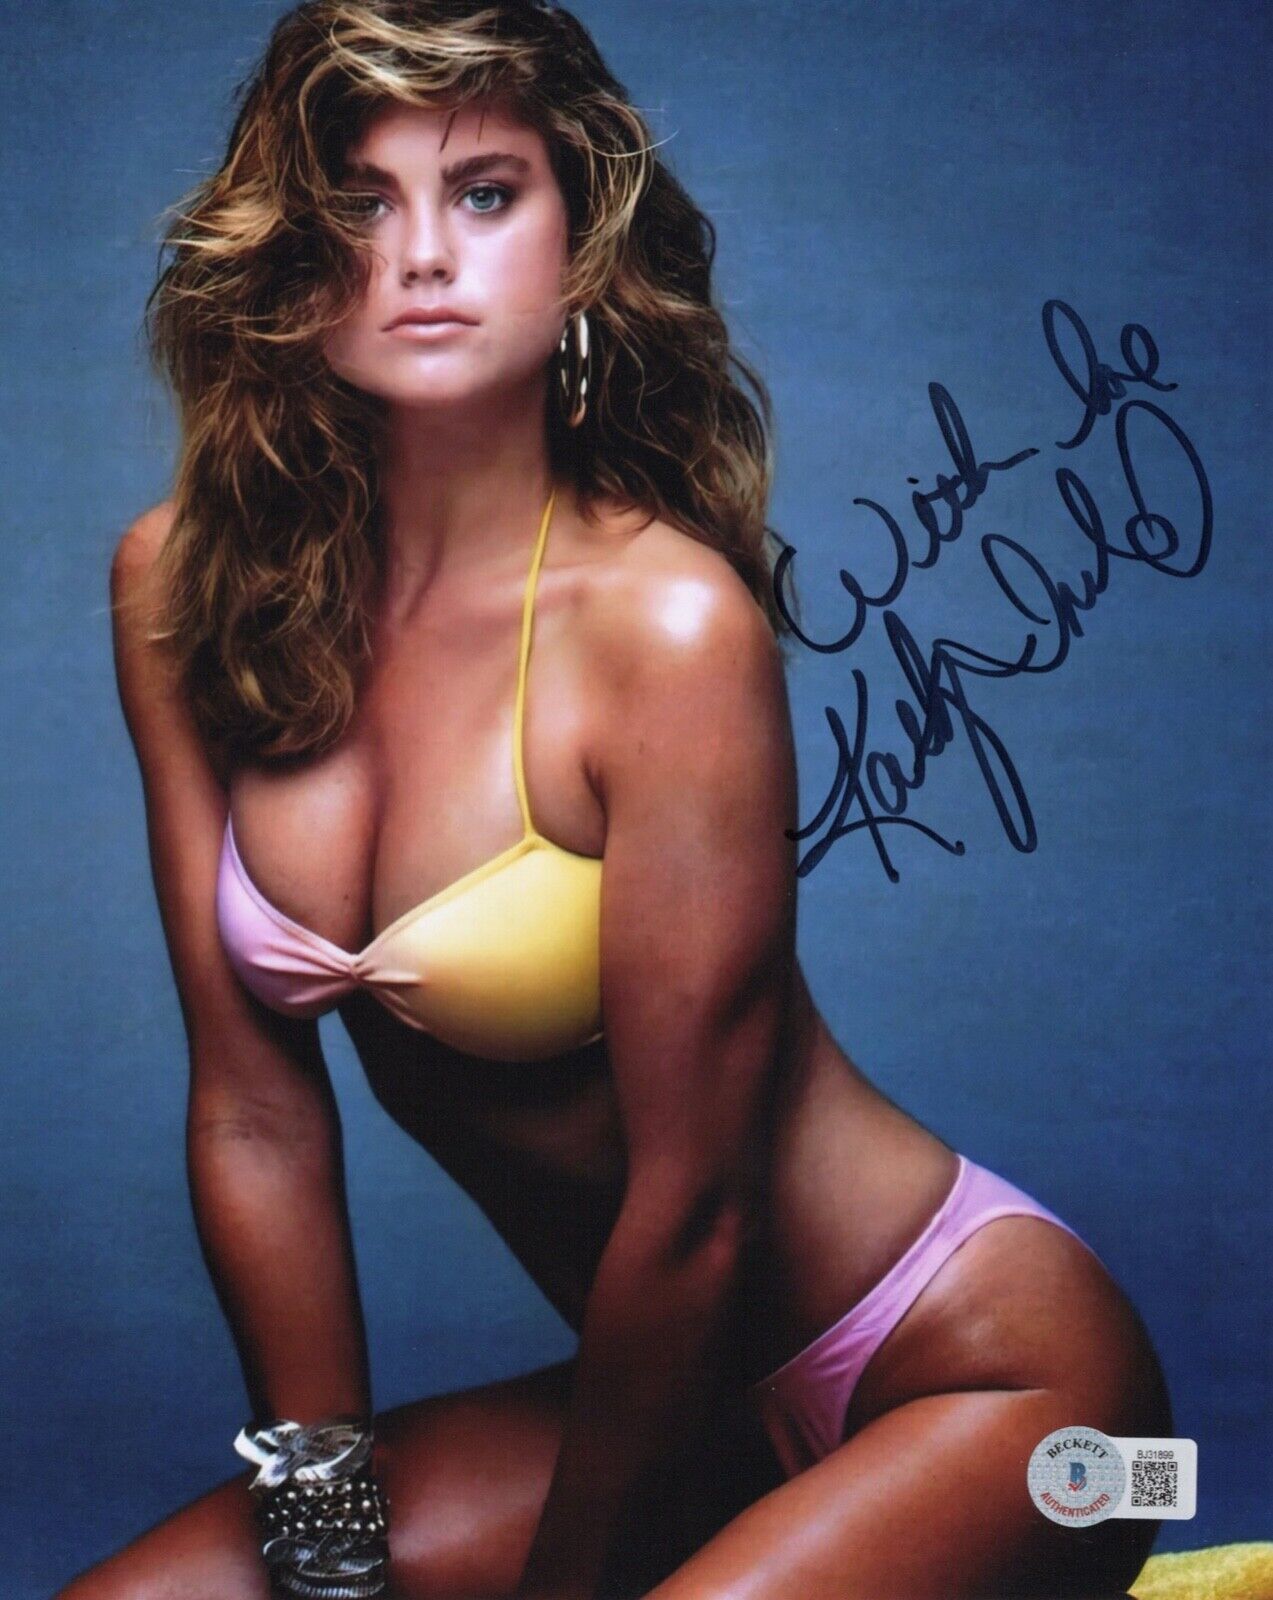 SEXY Kathy Ireland SPORTS ILLUSTRATED Autographed Signed 8x10 Photo Beckett BAS